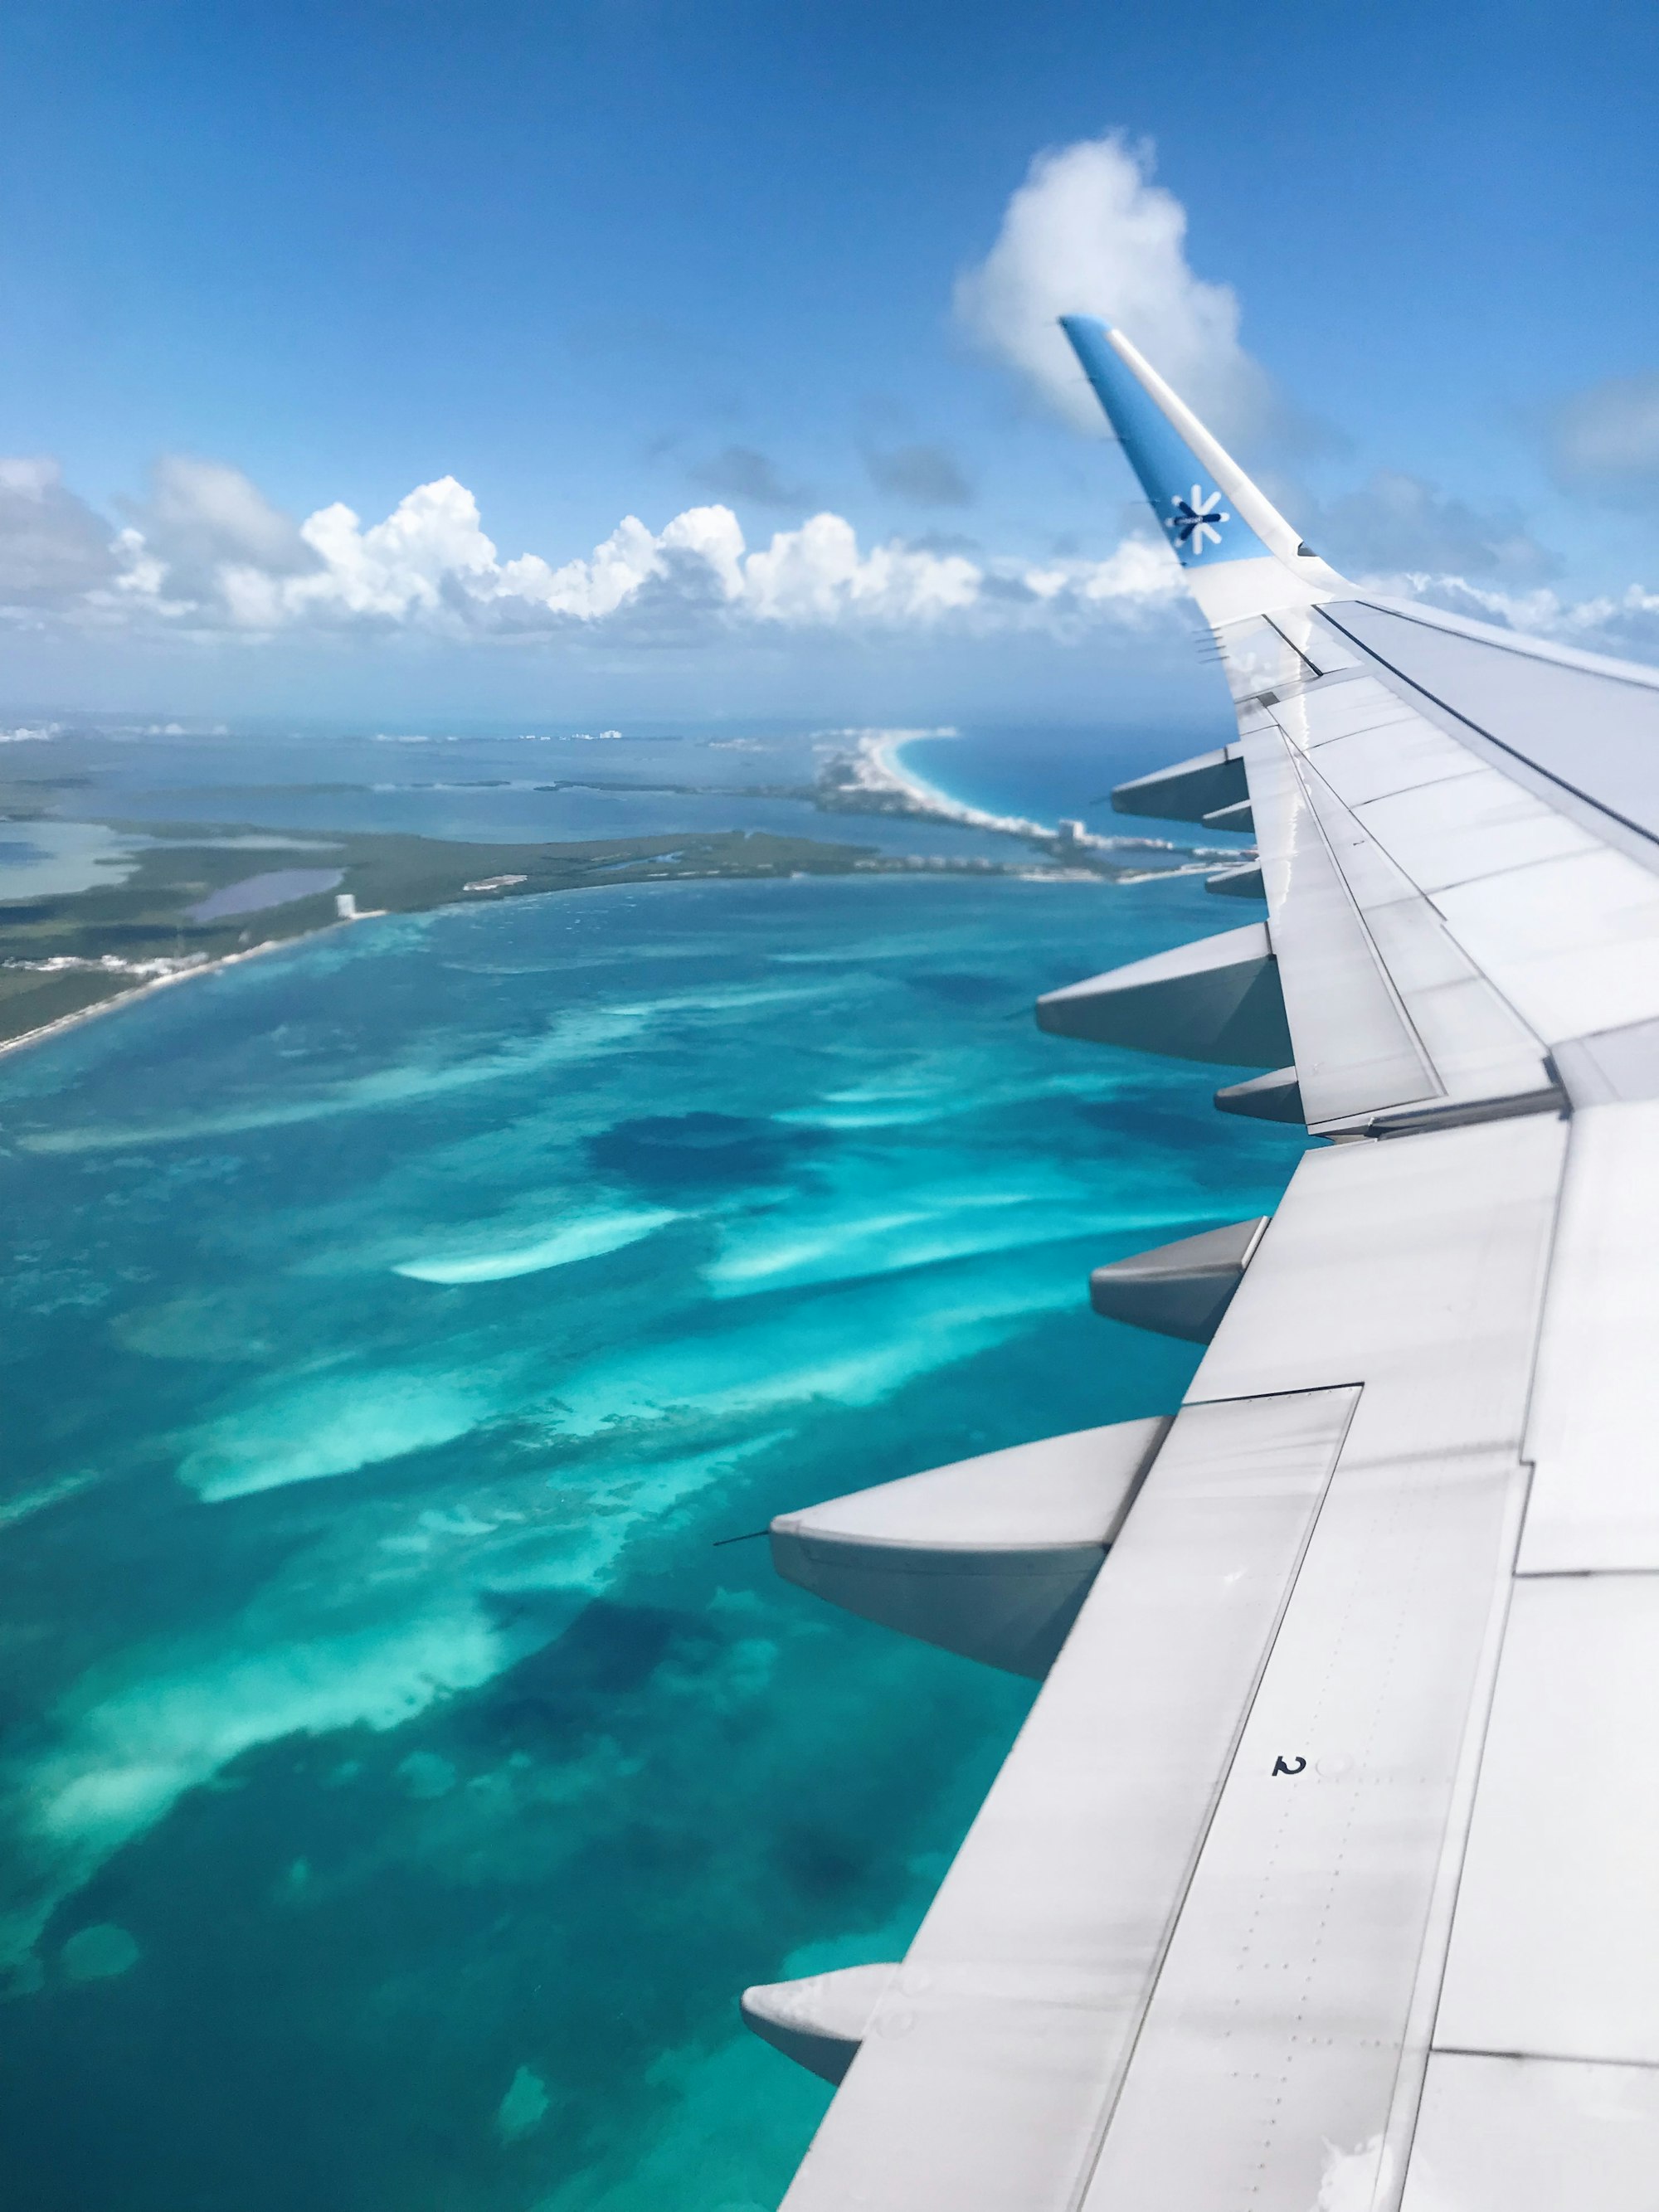 New flights to Cancun: air traffic continues to decline